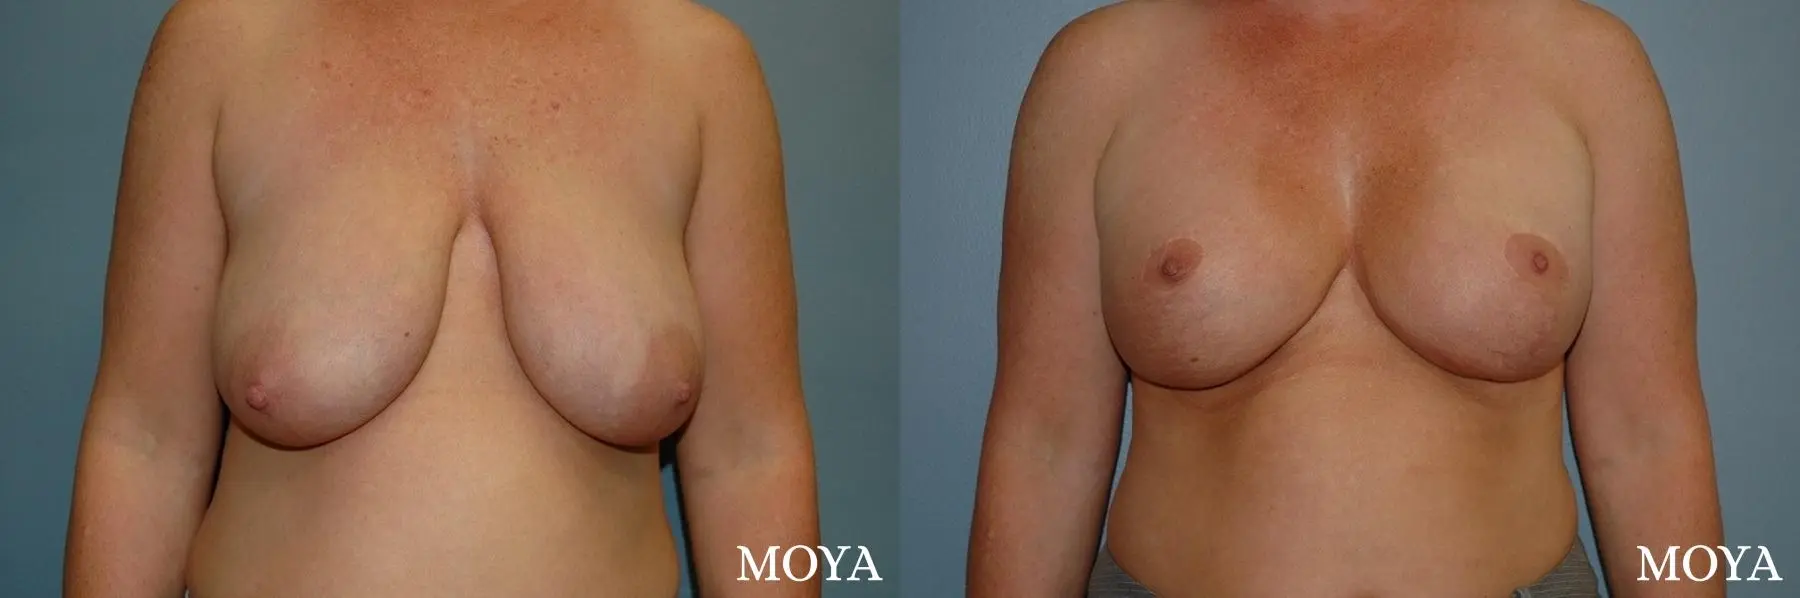 Breast Augmentation With Lift: Patient 9 - Before and After 1